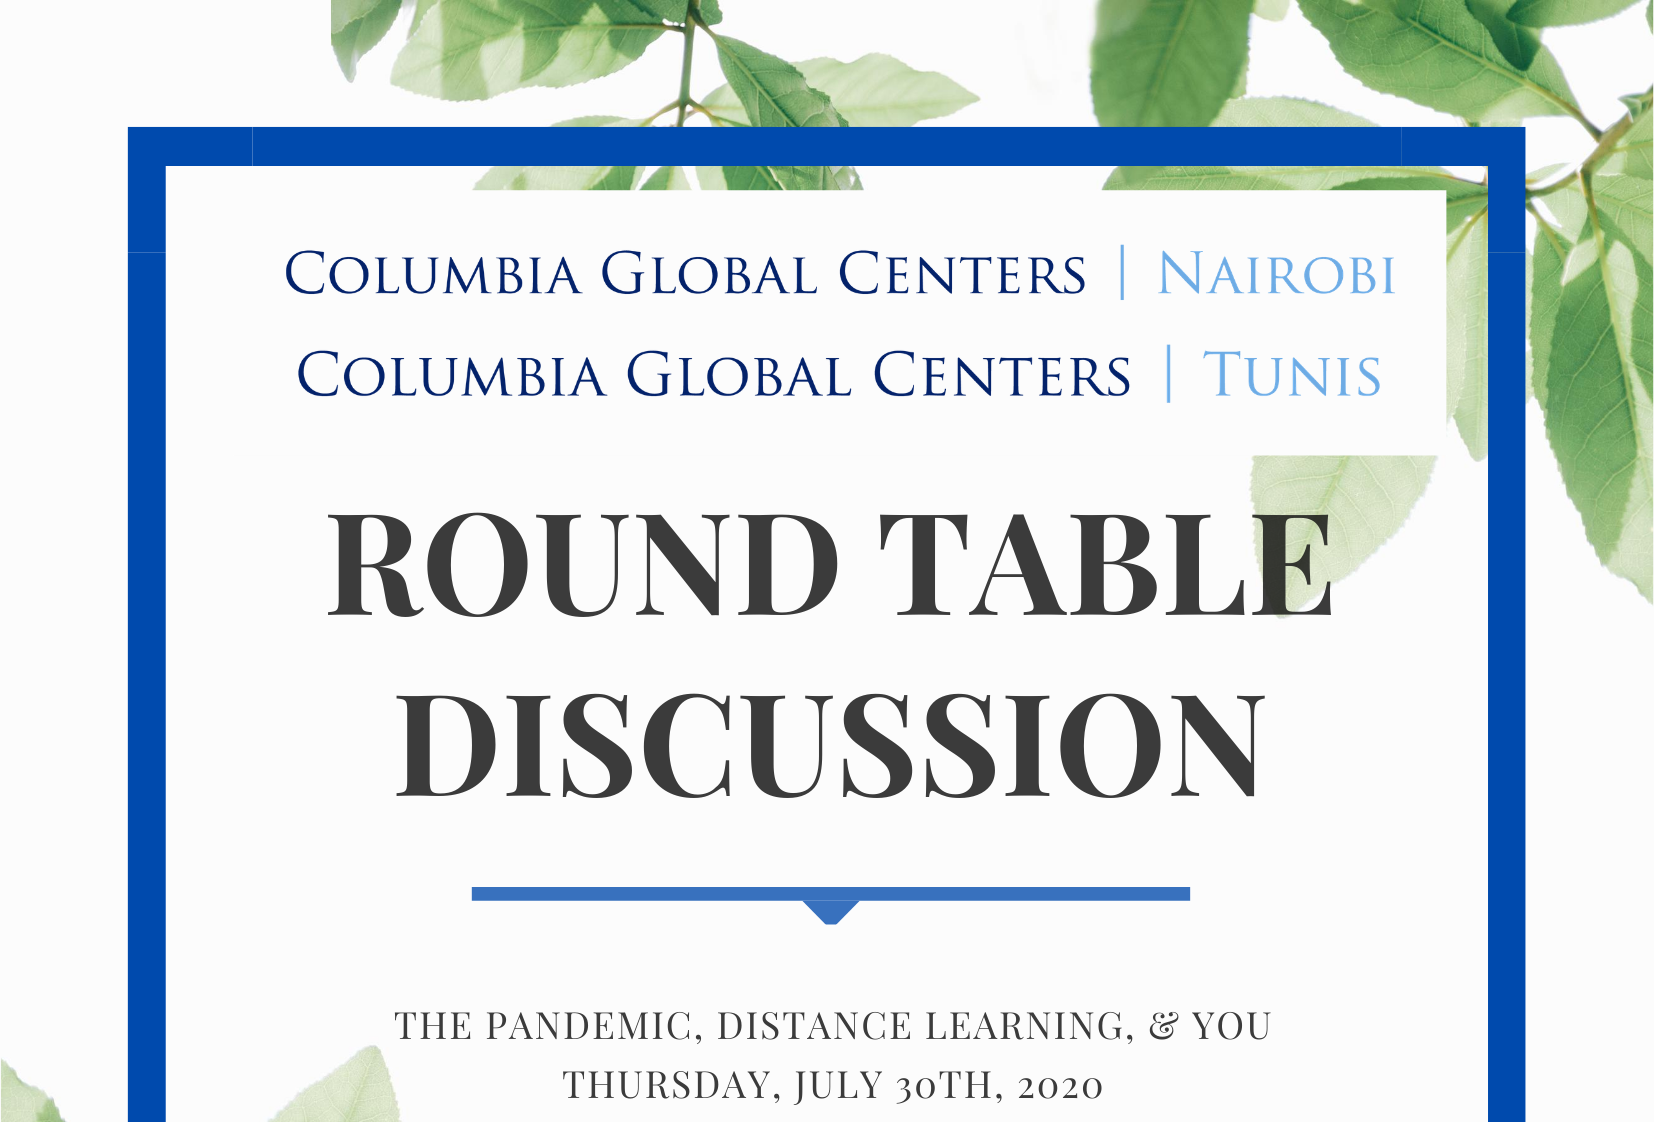 Columbia Global Centers | Tunis and Nairobi Hosted Virtual Discussion on COVID-19